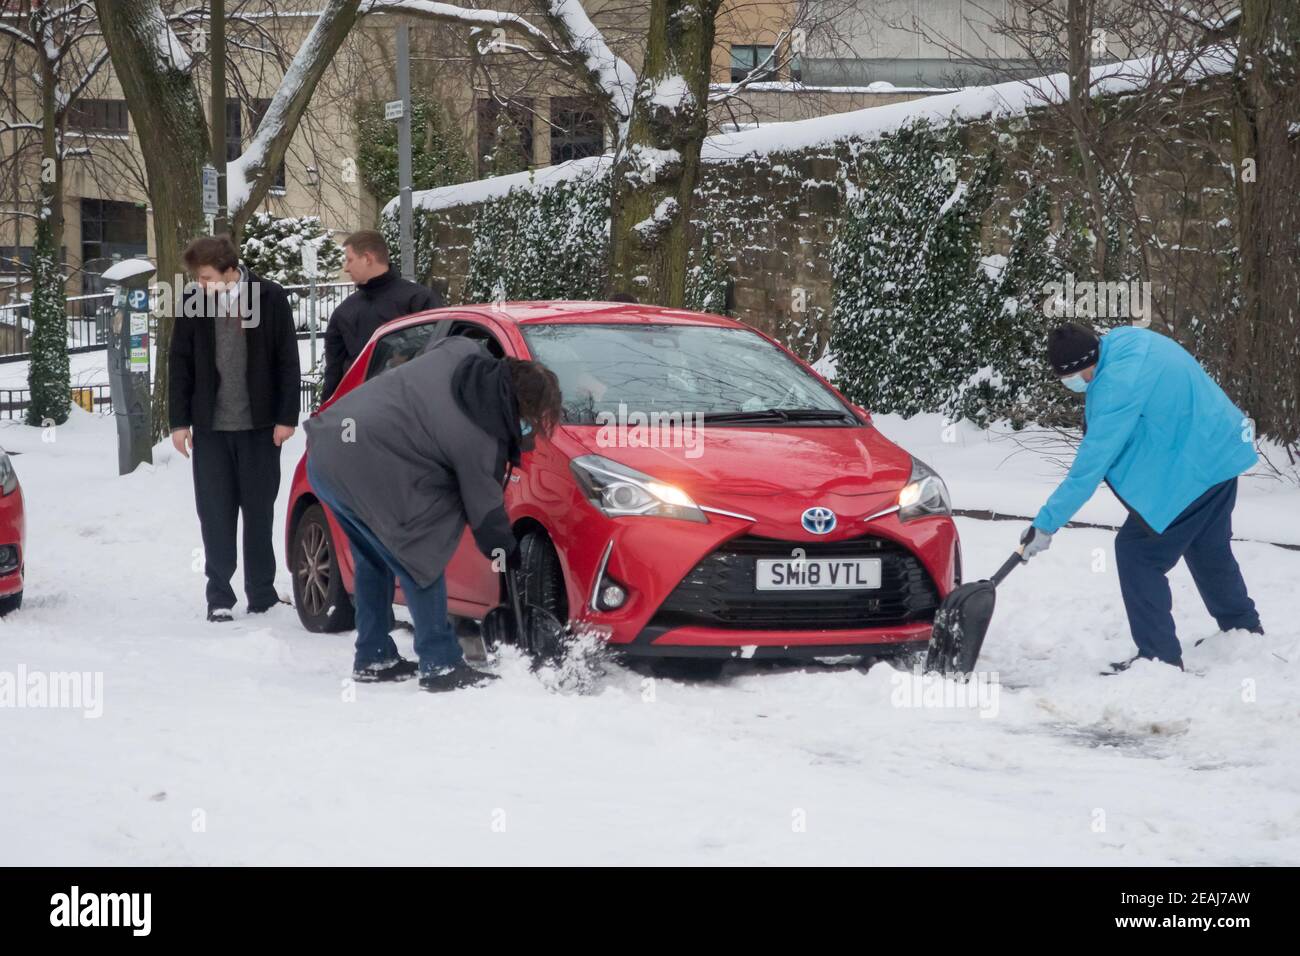 Edinburgh, Scotland, UK. 10th Feb 2021. Due to a heavy snowfall Edinburgh city center  was halted at a standstill this morning. Members of the public helping a driver stuck in the snow. Credit: Lorenzo Dalberto/Alamy Live News Stock Photo